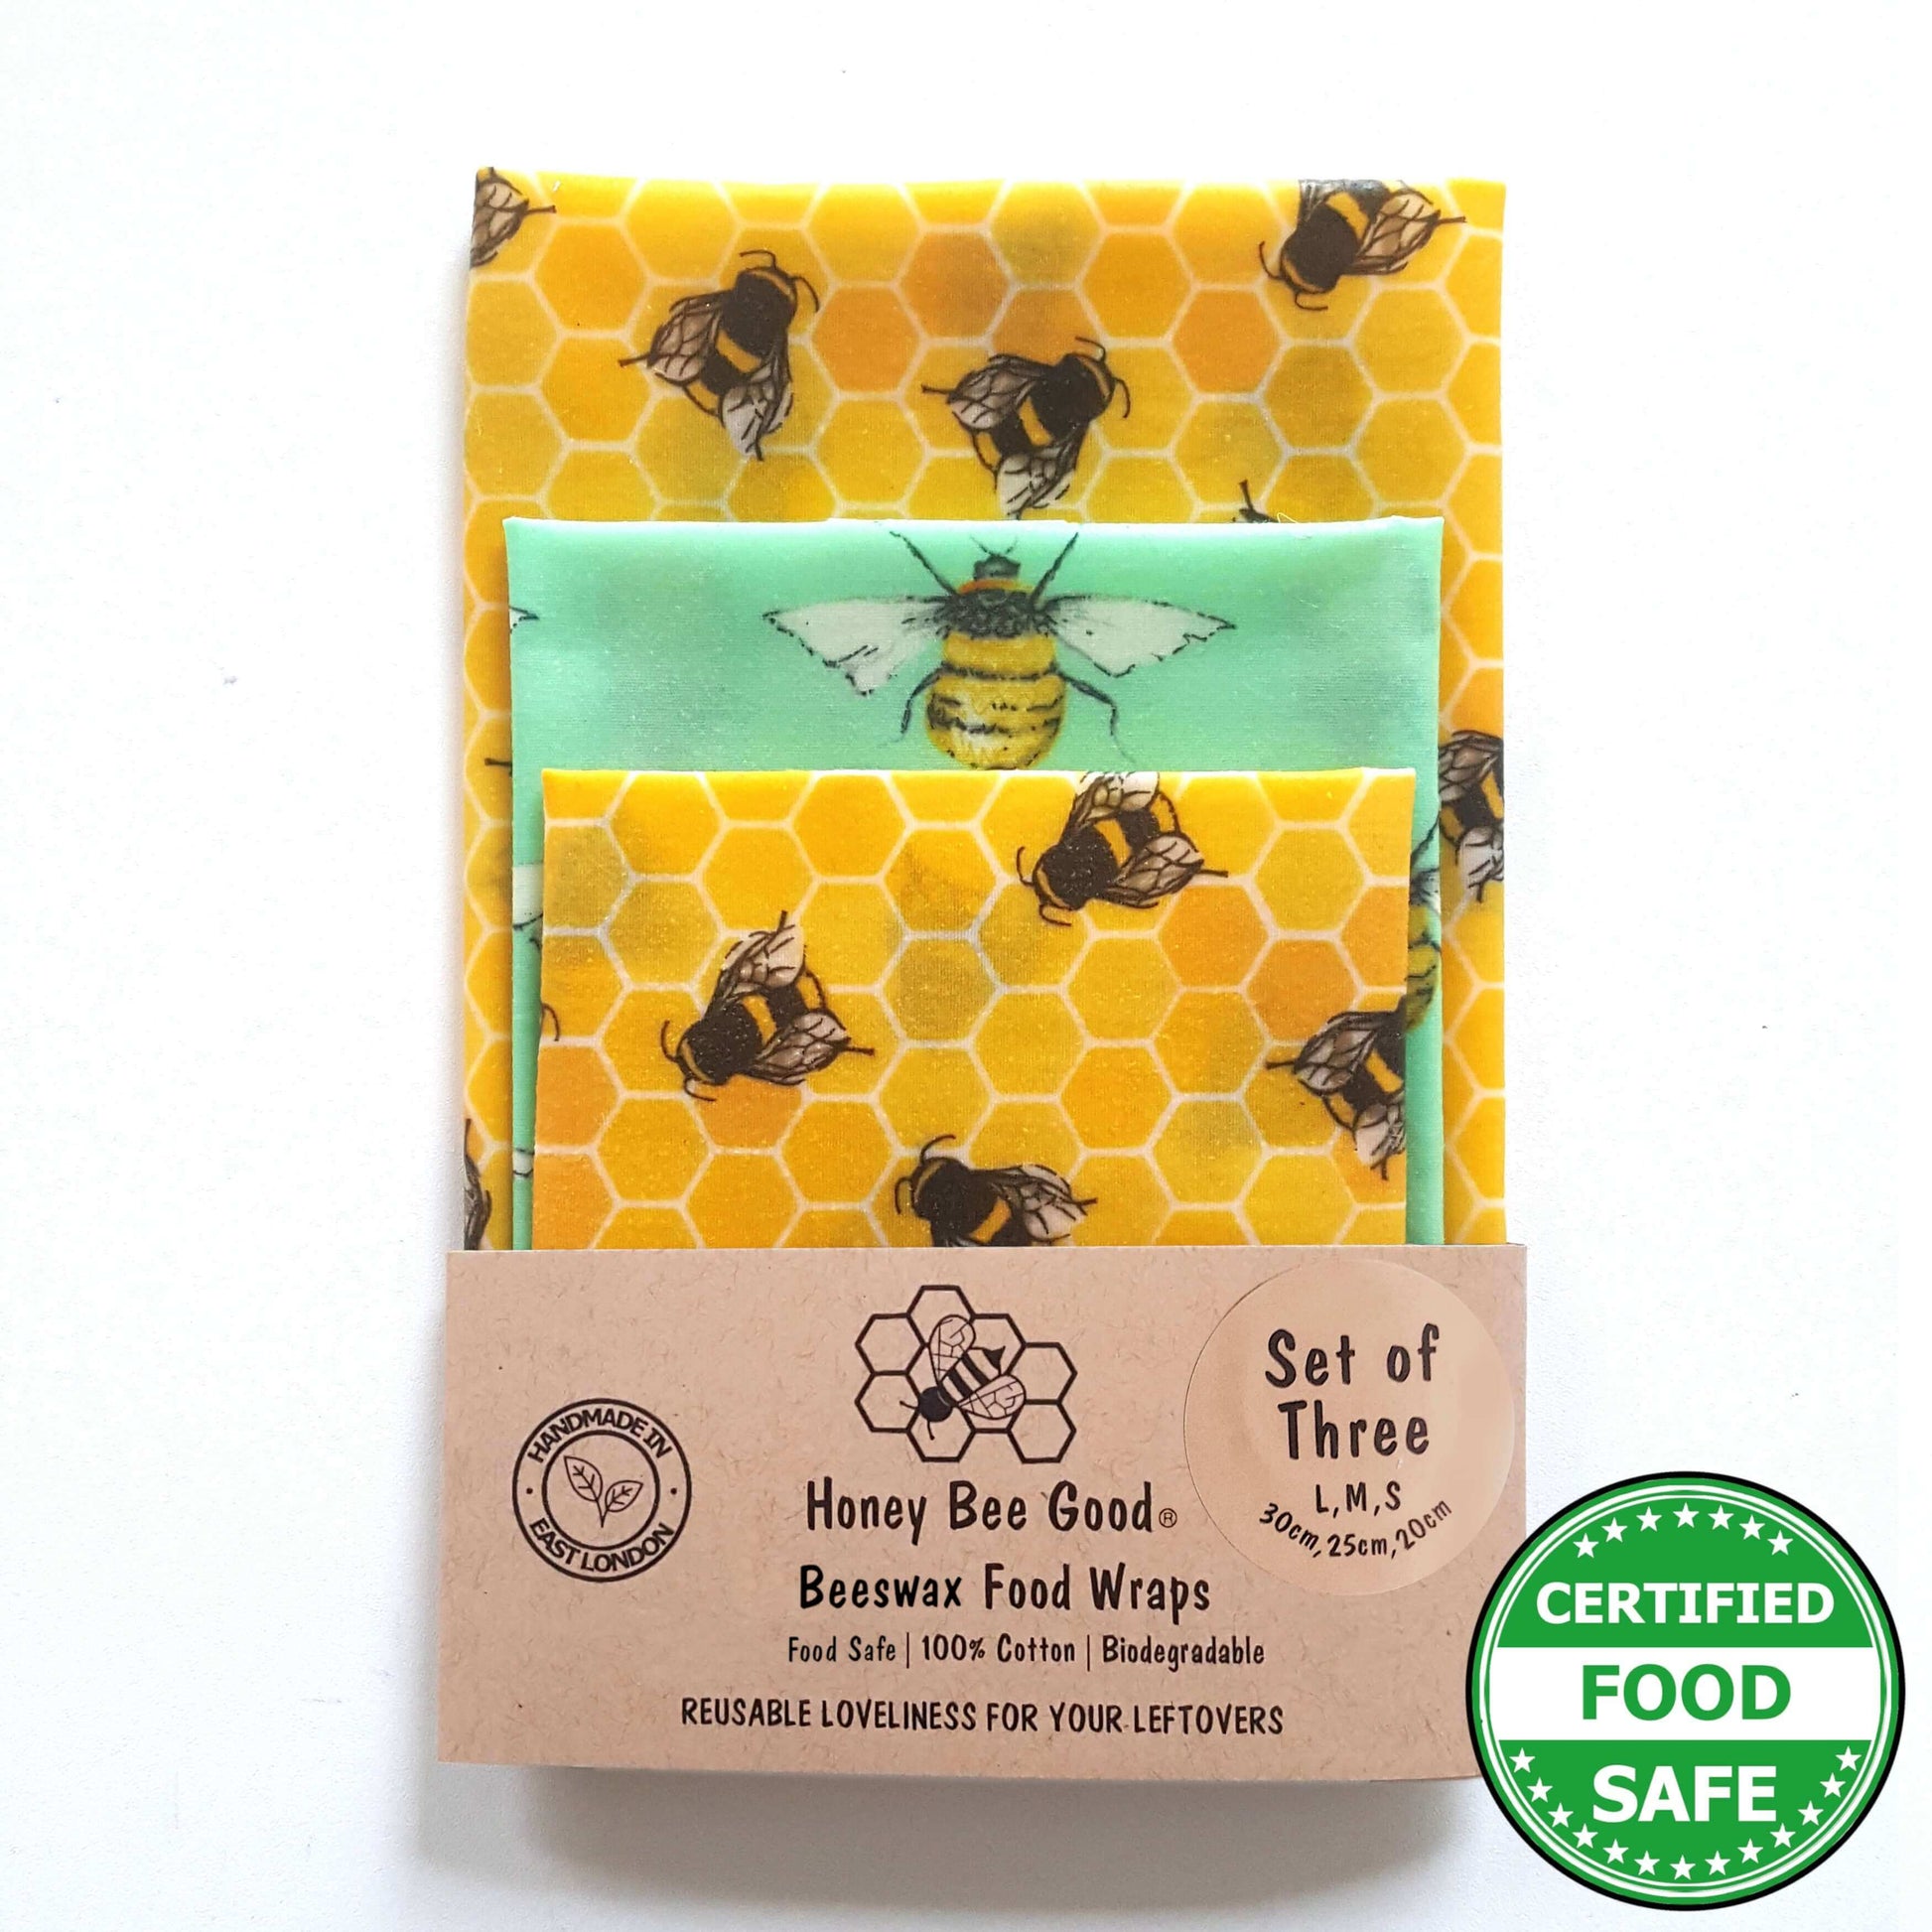 Reusable Beeswax Food Wraps 100% Hand Made in the UK by Honey Bee Good shown in Set of 3 Classic Bee Happy pattern